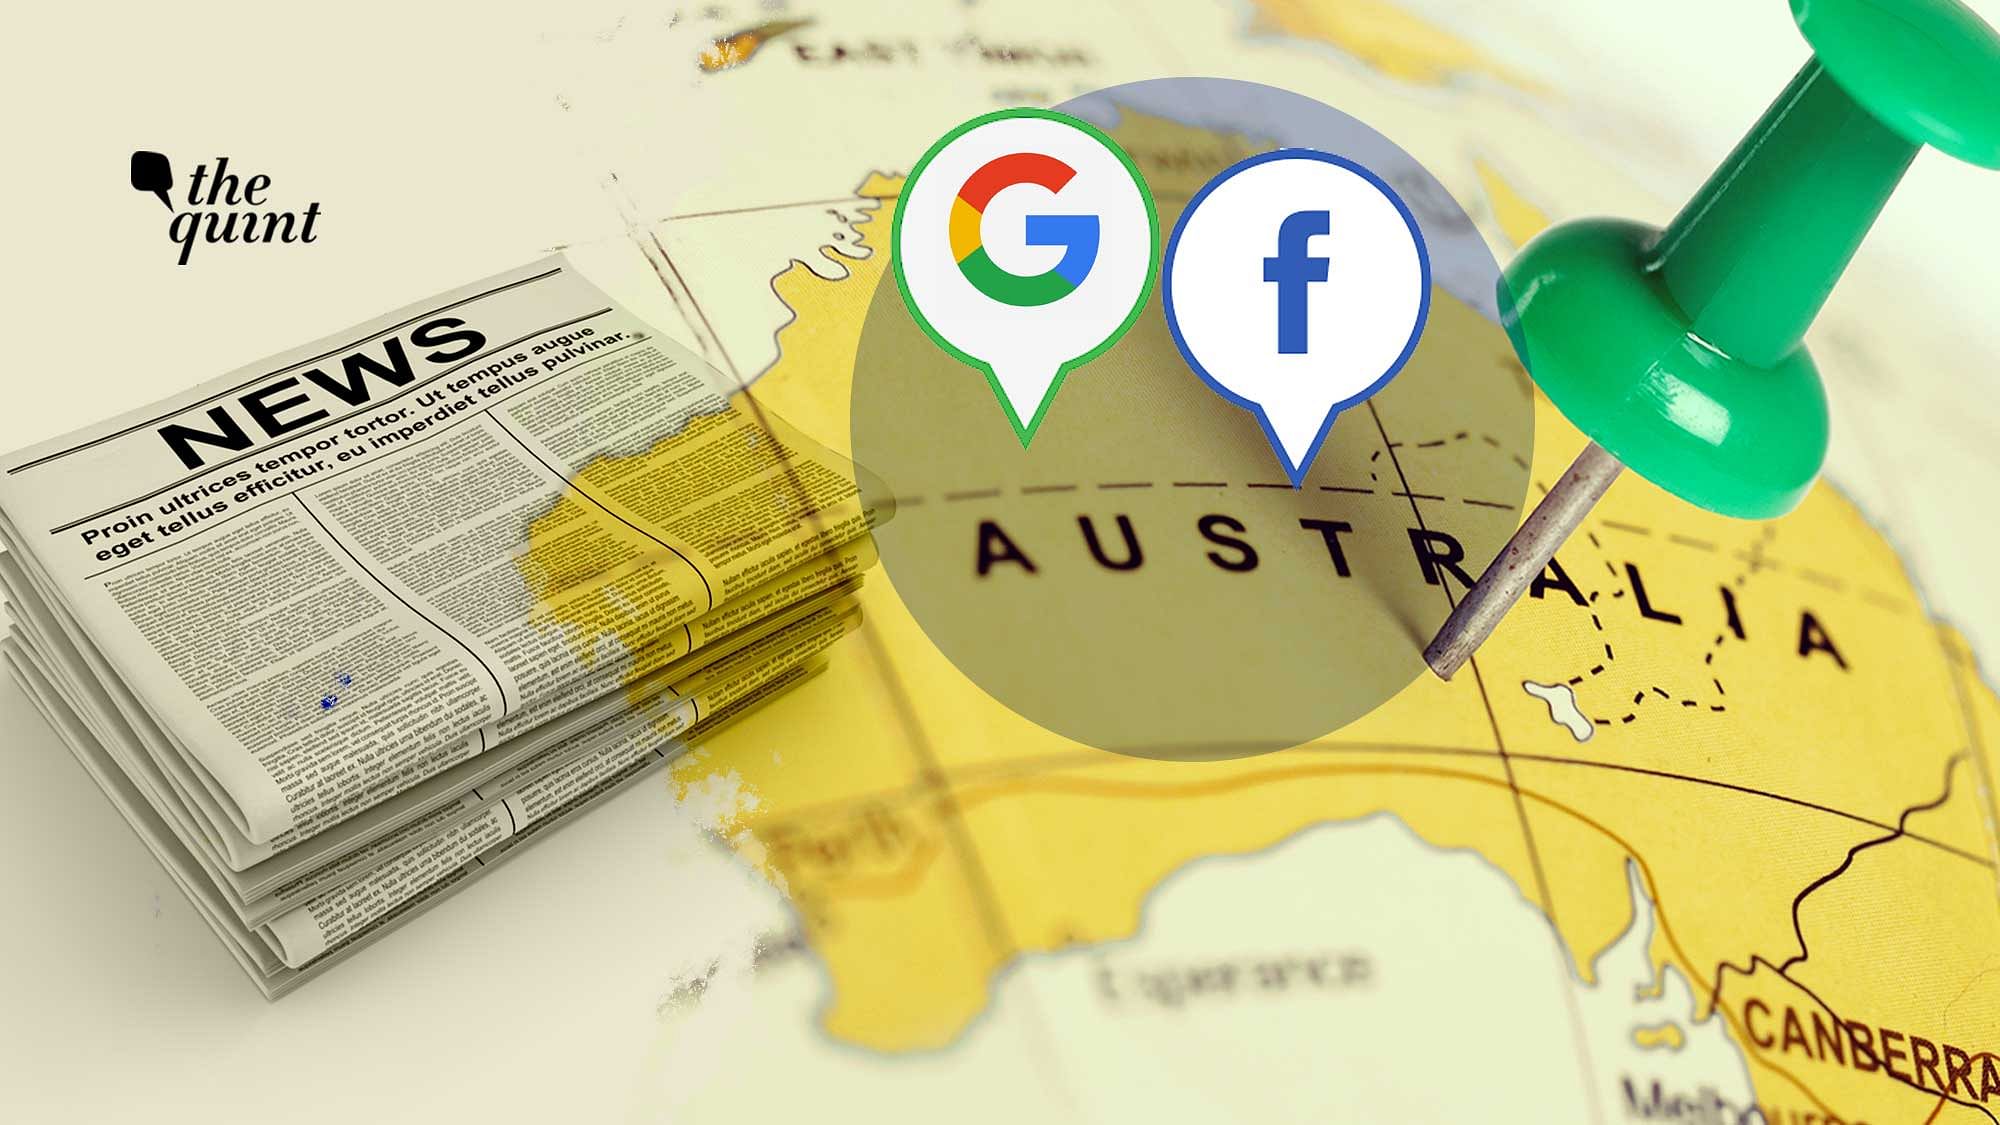 Following the<a href="https://www.thequint.com/cyber/policy/google-multi-million-dollar-deals-australia-news-publishers-facebook-refuses#read-more"> News Corp global news deal with Google</a>, Facebook, in a giant pushback against the Australian legislation on monetising news content online, blocked out users and news organisations among others in Australia from sharing news and other links on their platform.